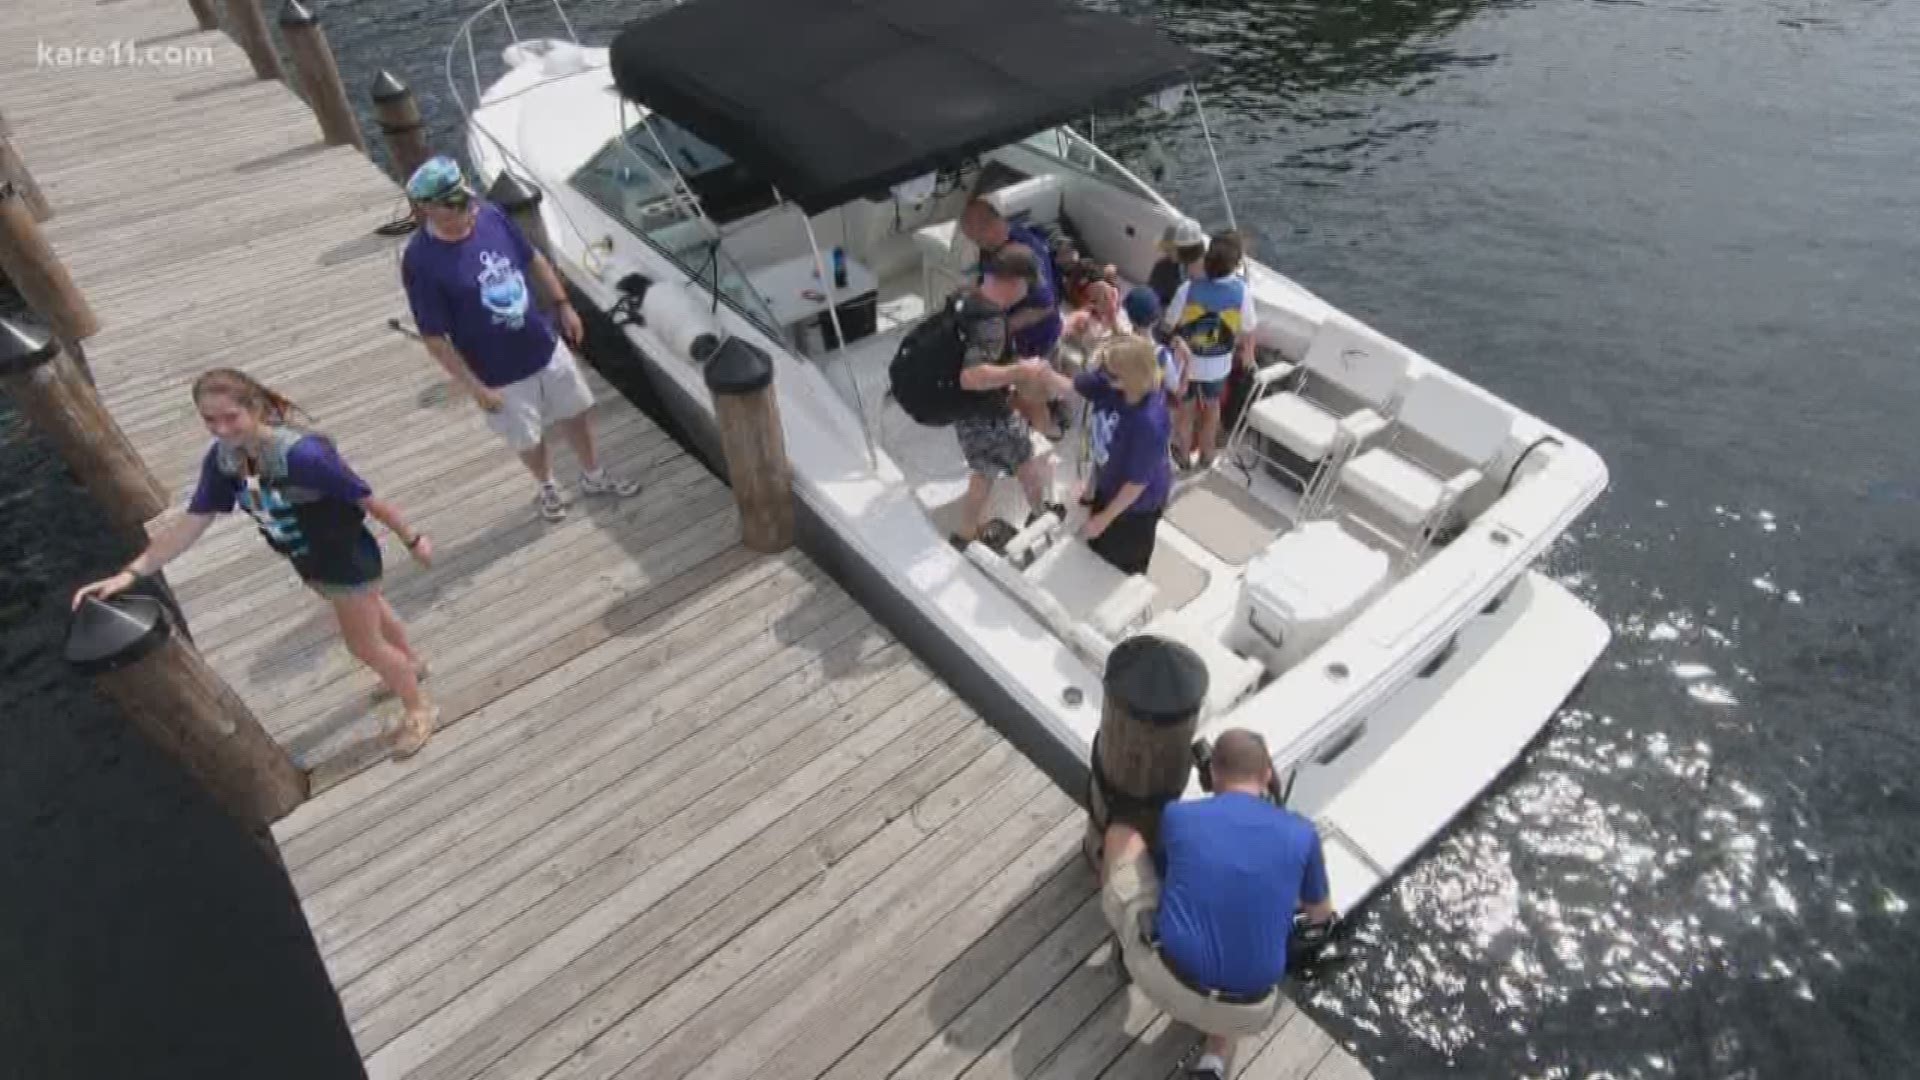 Kids with life-threatening medical conditions, and their families, got to ride boats, fish and play some games during the event with the Minnetonka Power Squadron.